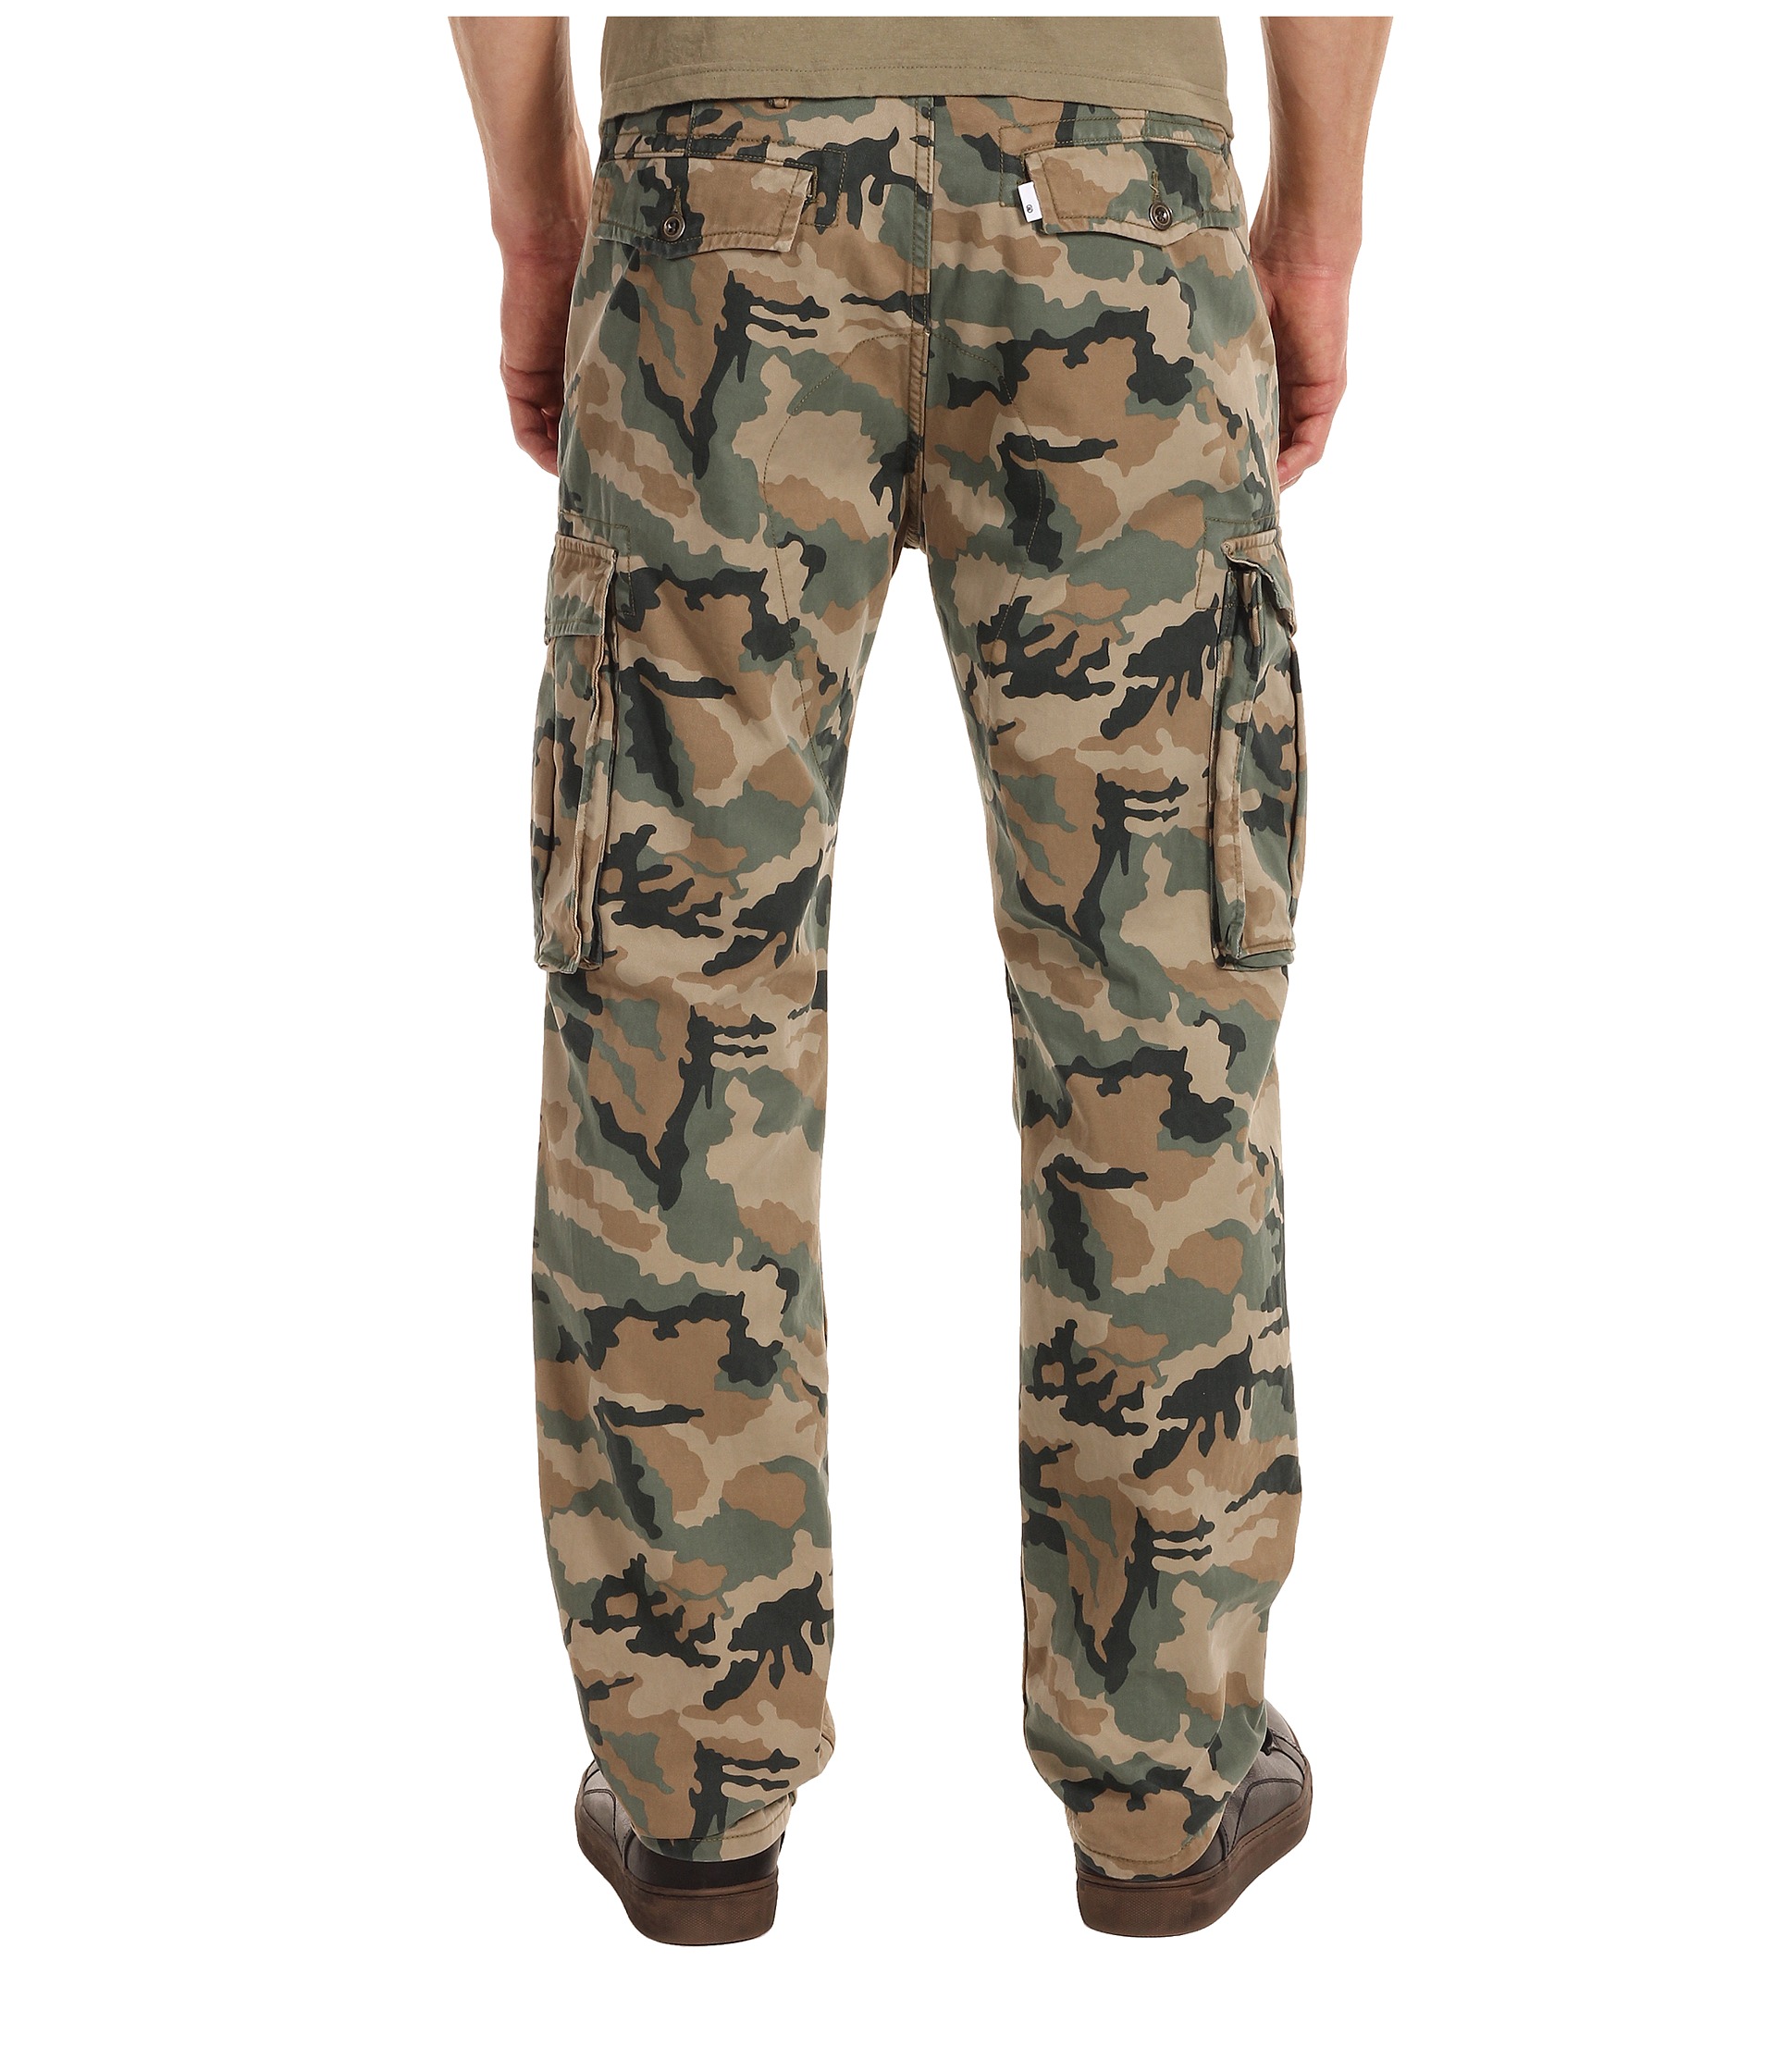 Levis Mens Ace Cargo Pant Camo | Shipped Free at Zappos